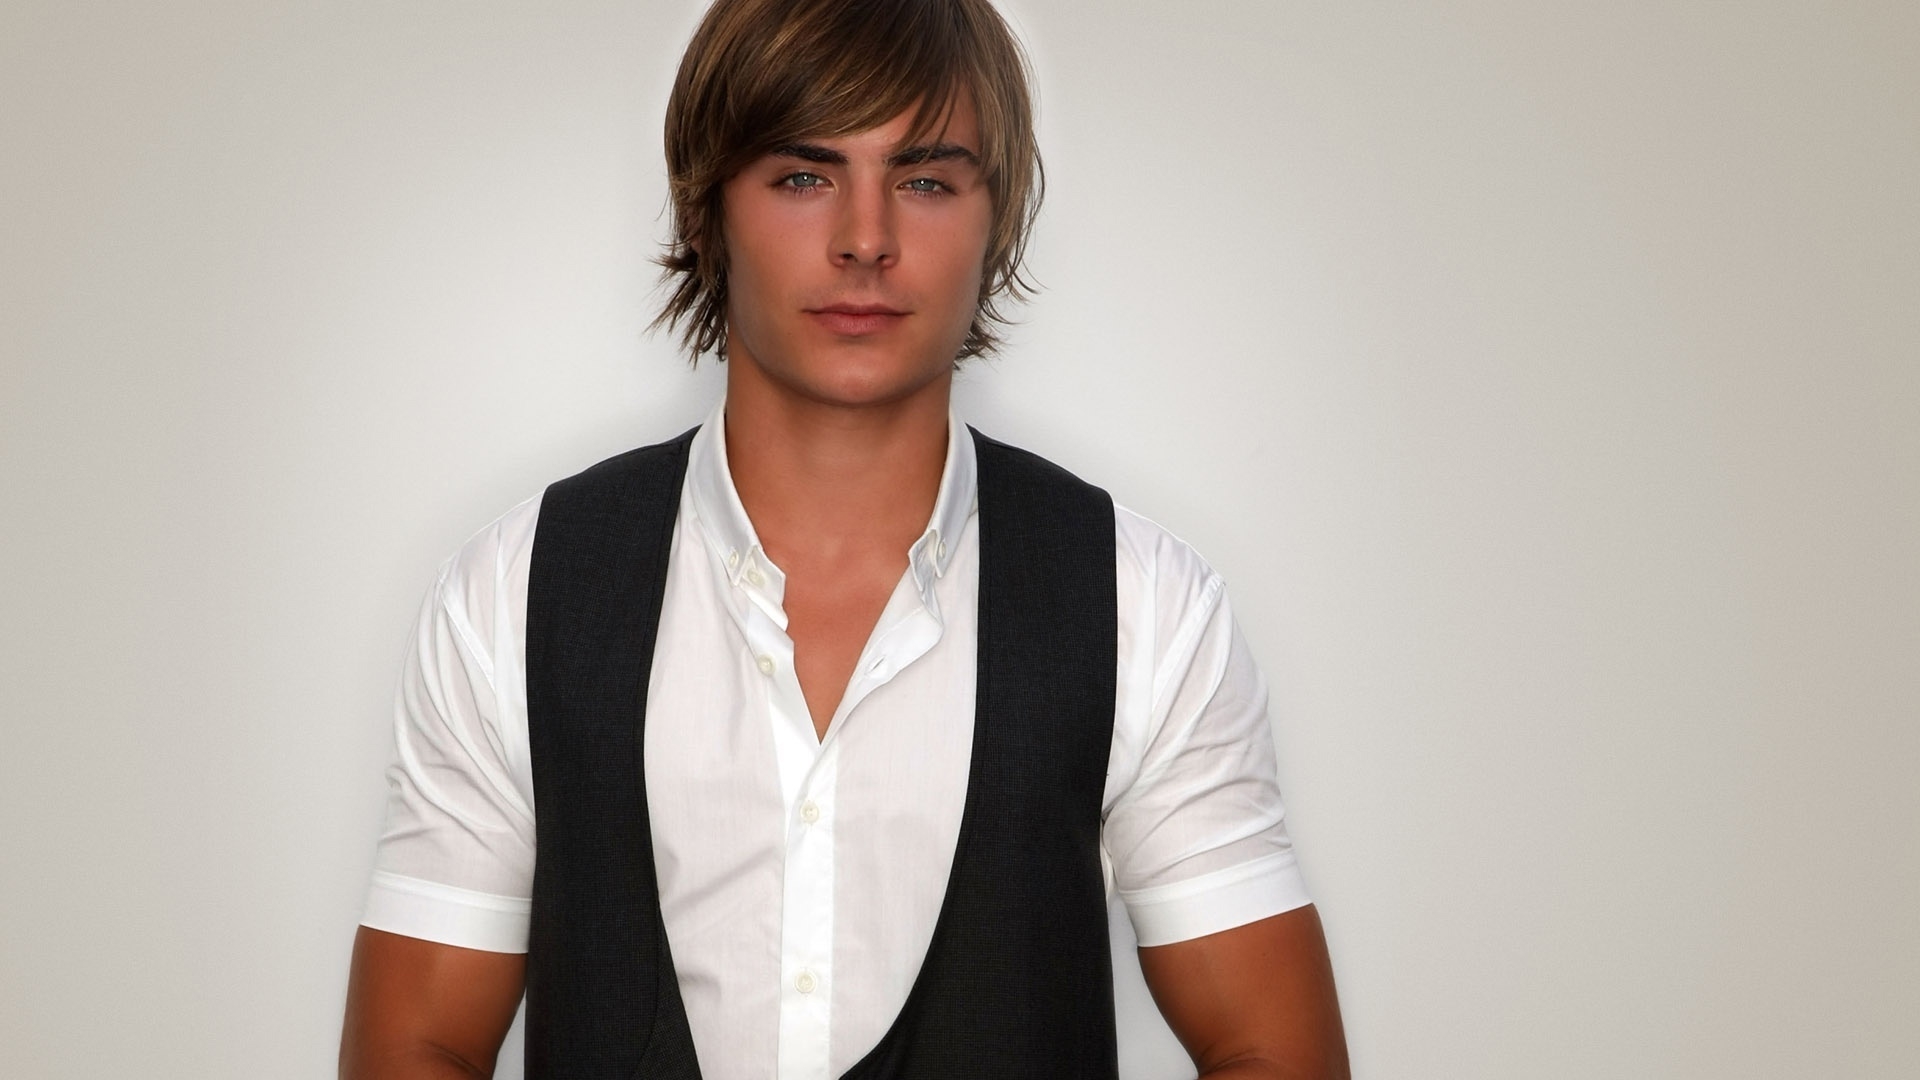 Efron Zac for 1920 x 1080 HDTV 1080p resolution